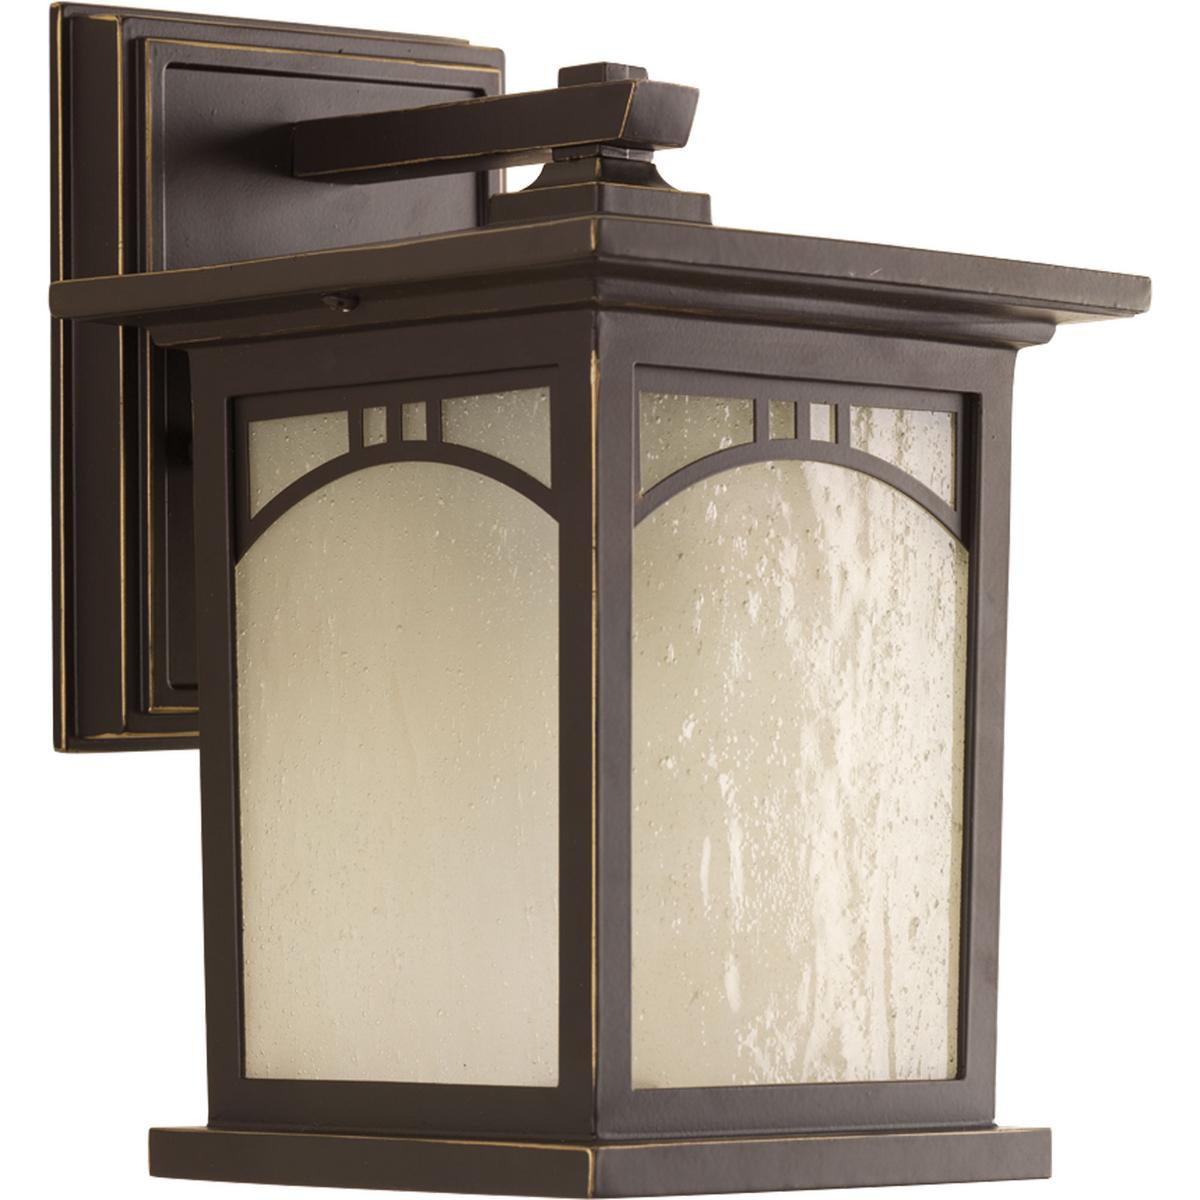 Hubbell P6052-20 Outdoor one-light small wall lantern with geometric details, umber textured art glass, and an Antique Bronze finish.  ; Antique bronze finish. ; Umber textured art glass panels. ; Geometric details.